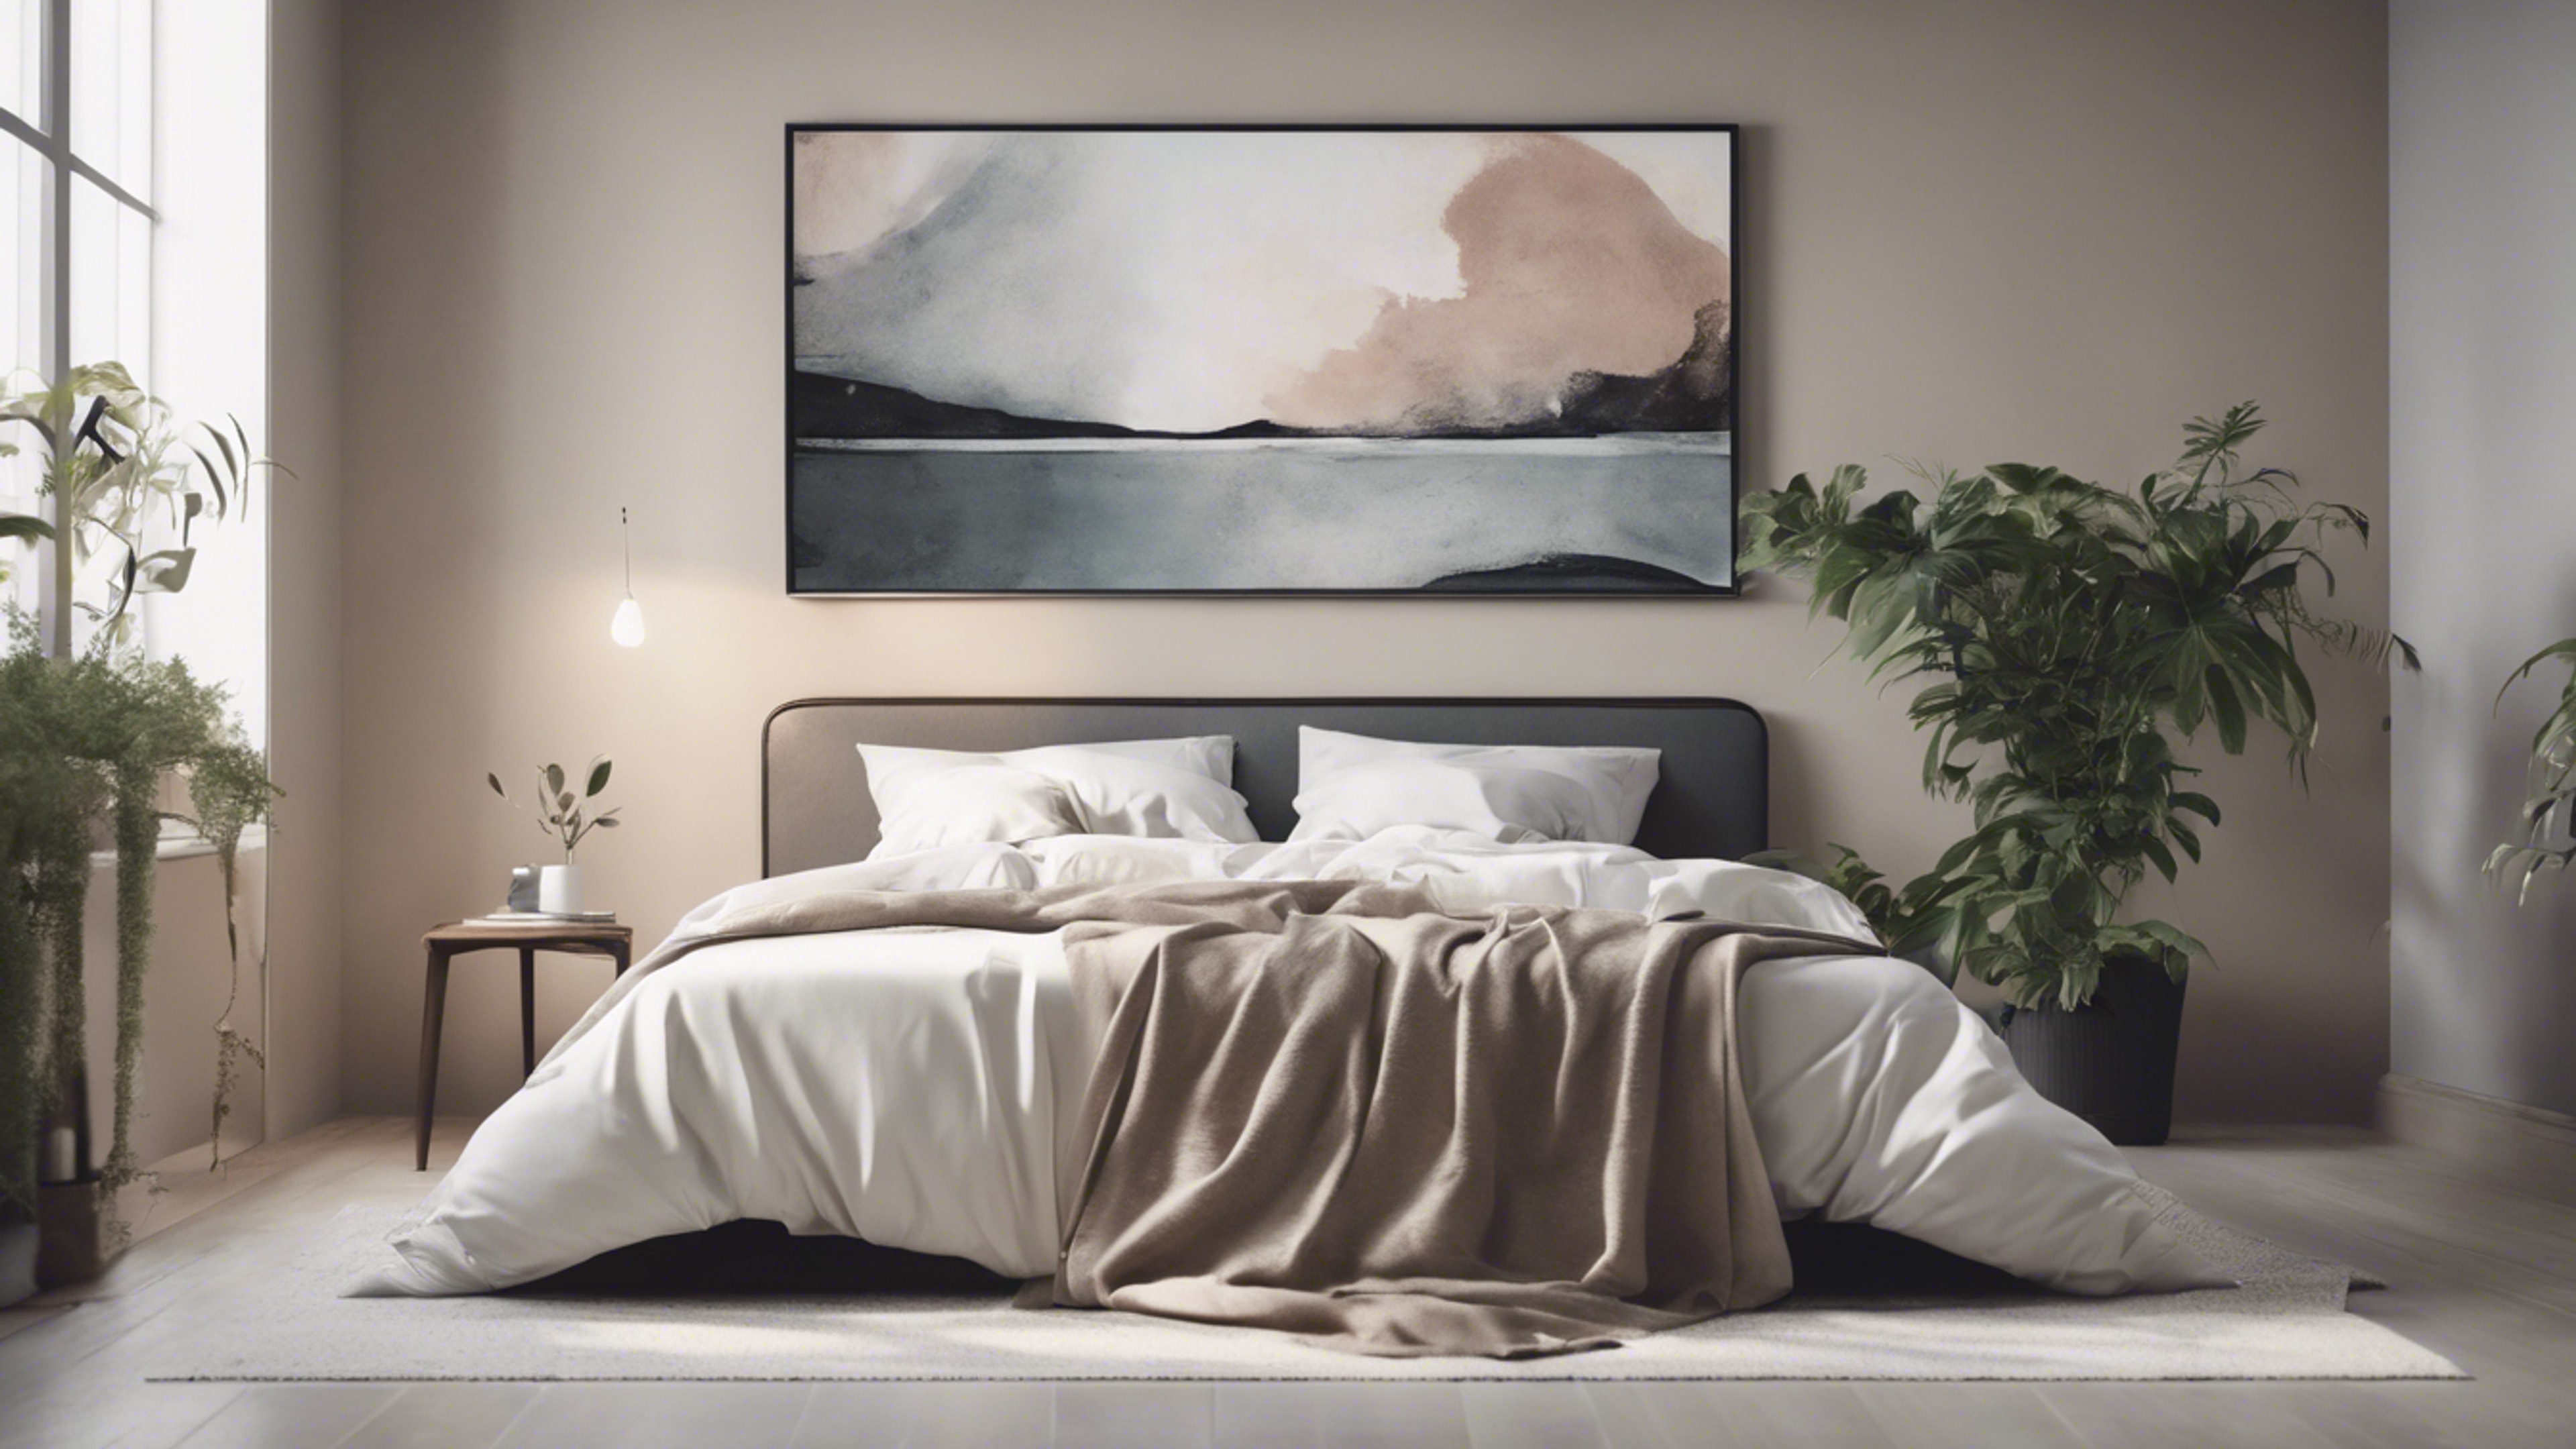 Minimalist bedroom in muted tones with a simple queen-sized bed, a potted plant, and an abstract painting. Wallpaper[015f6f42387b4ed28c5e]